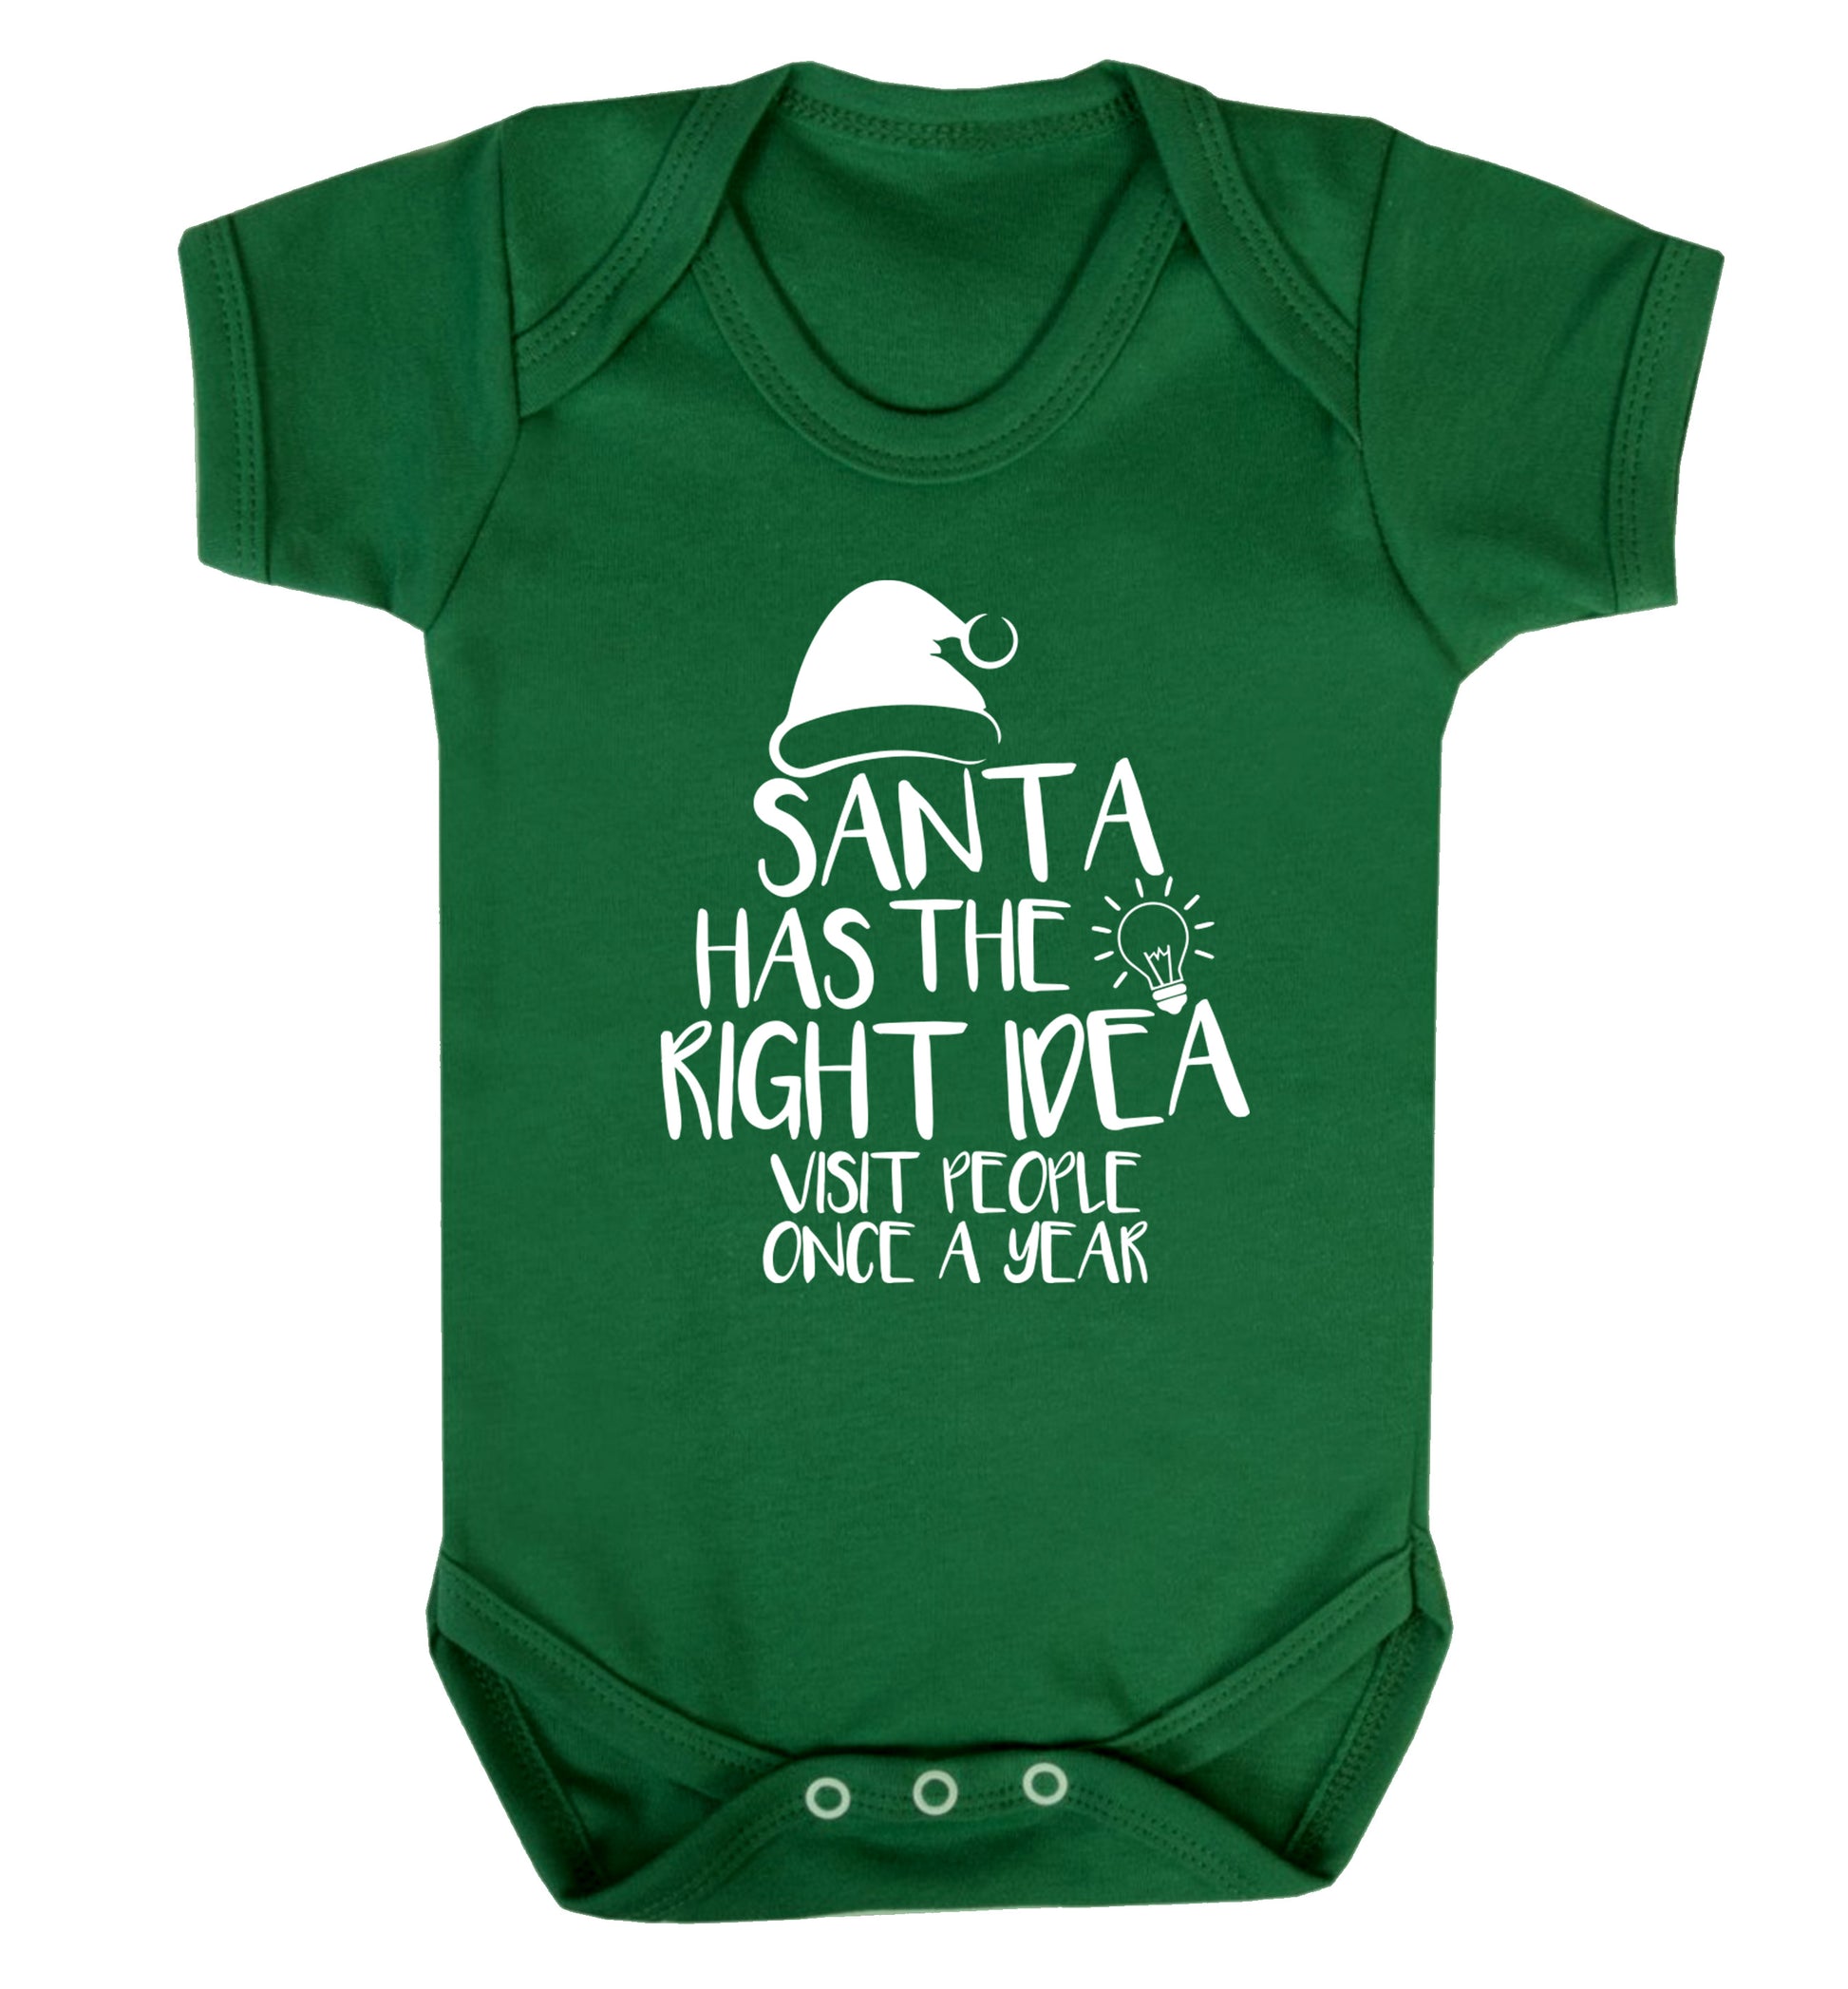 Santa has the right idea visit people once a year Baby Vest green 18-24 months